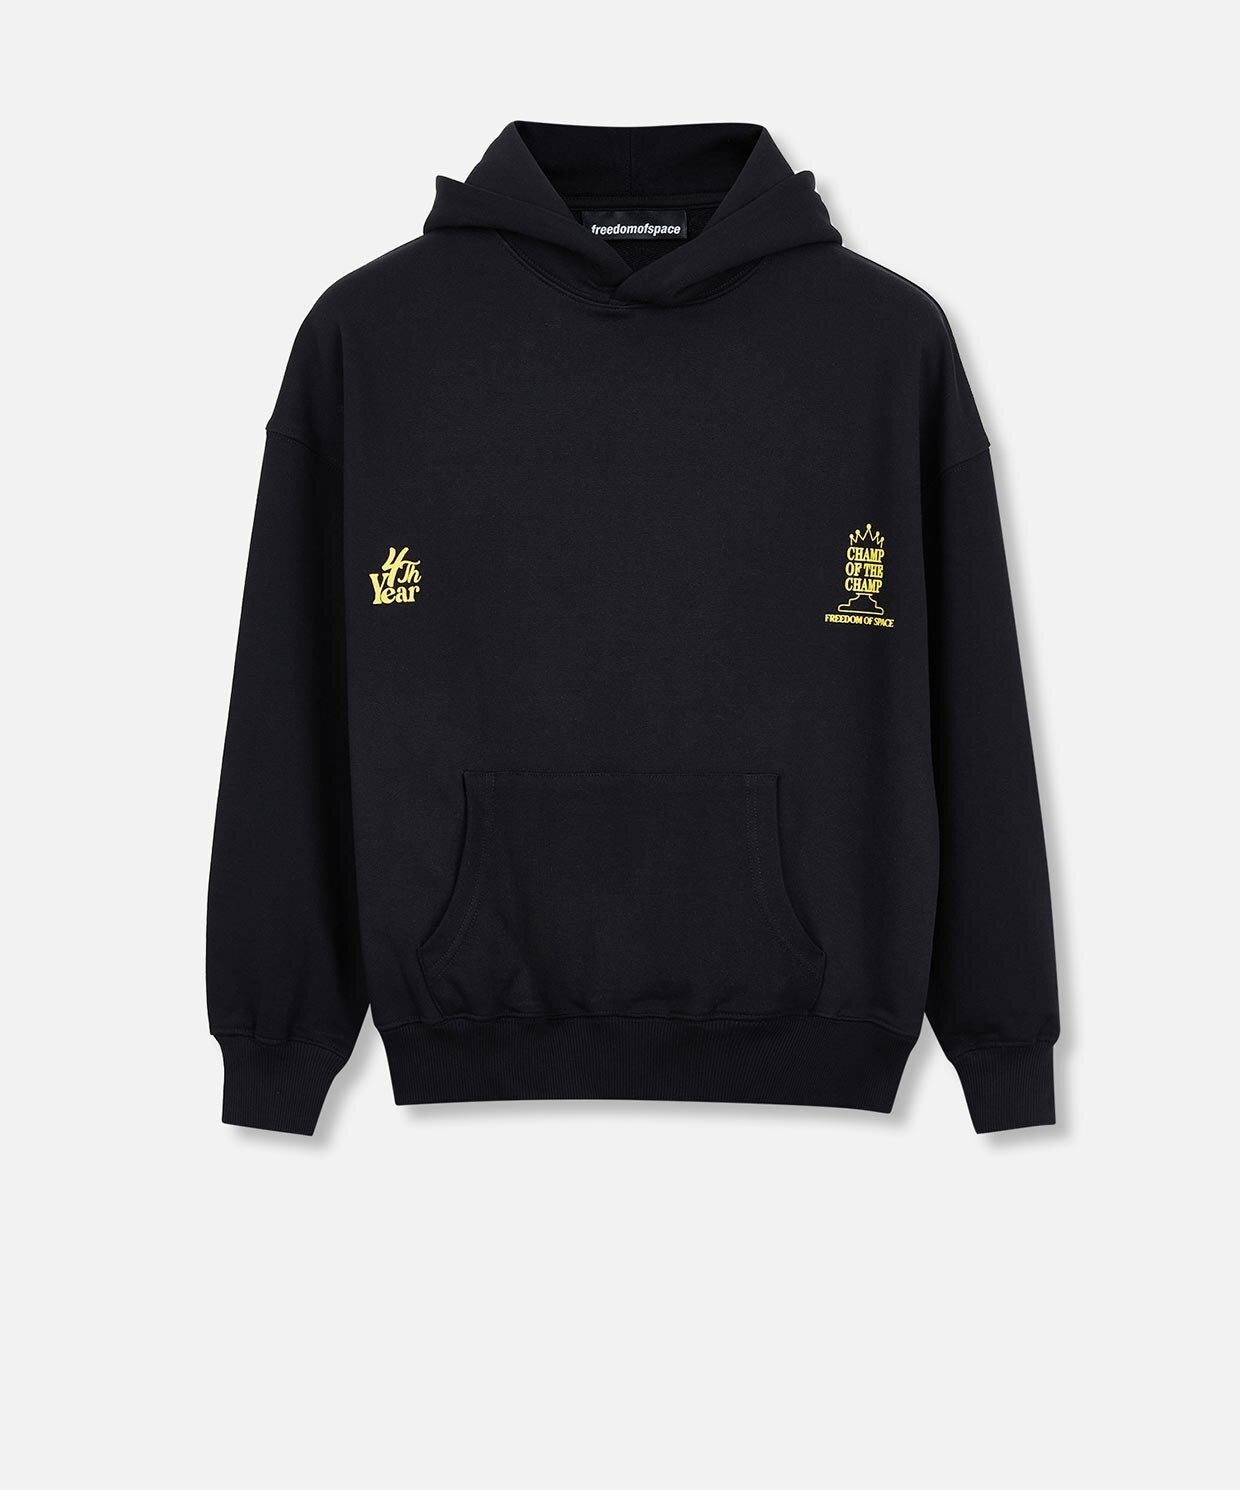 Freedom Of Space World Champion Hoodie